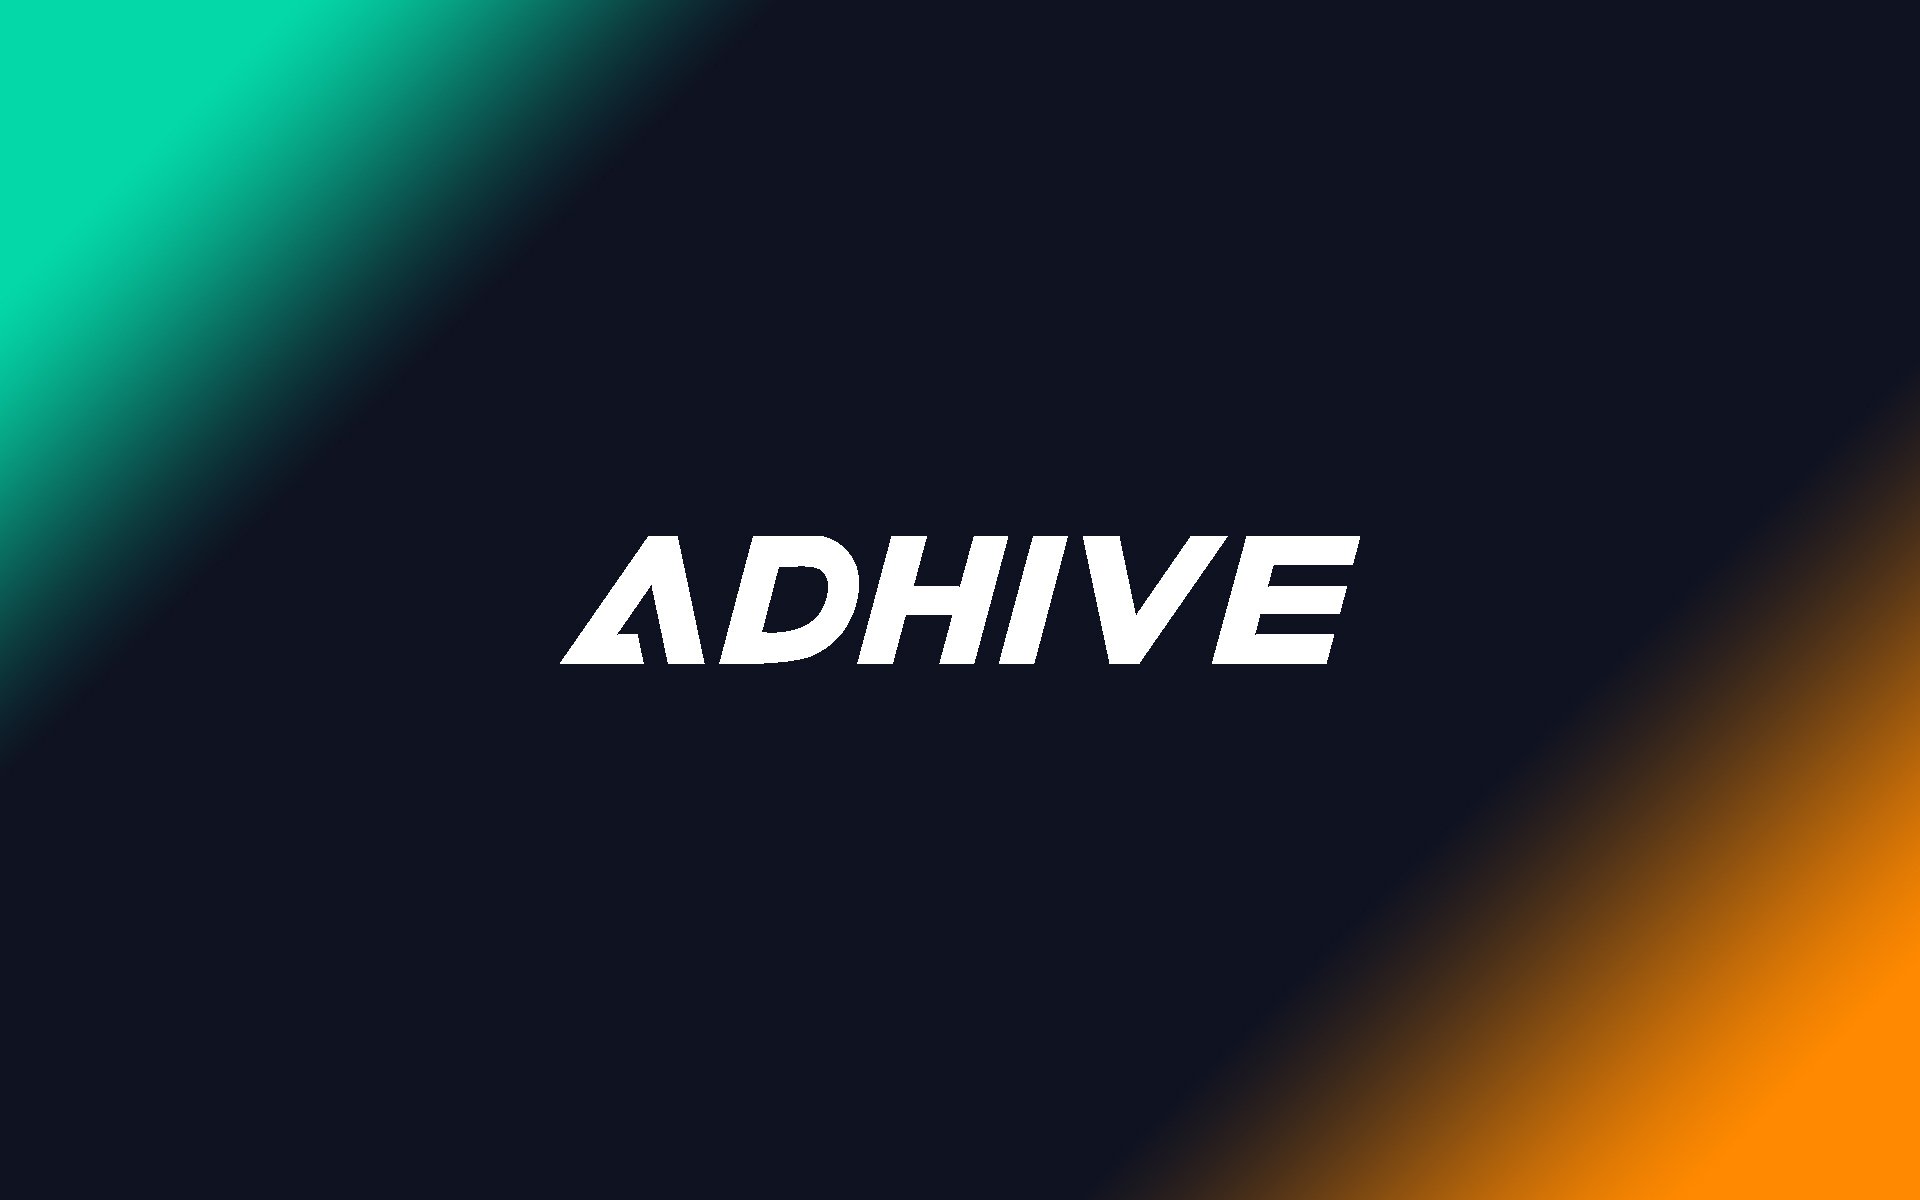 AdHive Confirms Plans to List ADH Token on HitBTC and QRYPTOS Exchanges in April 2018